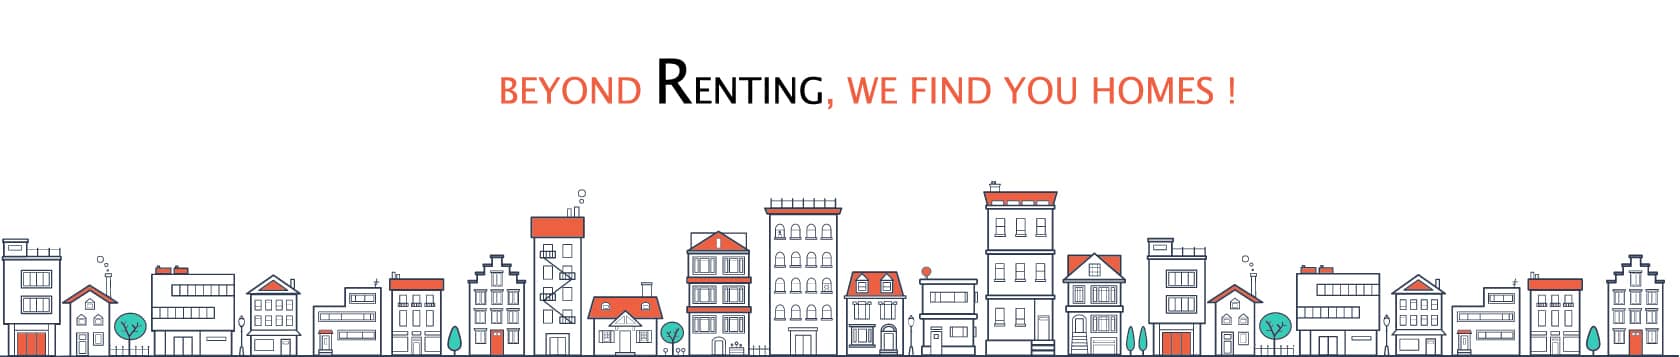 Apartment On Rent banner